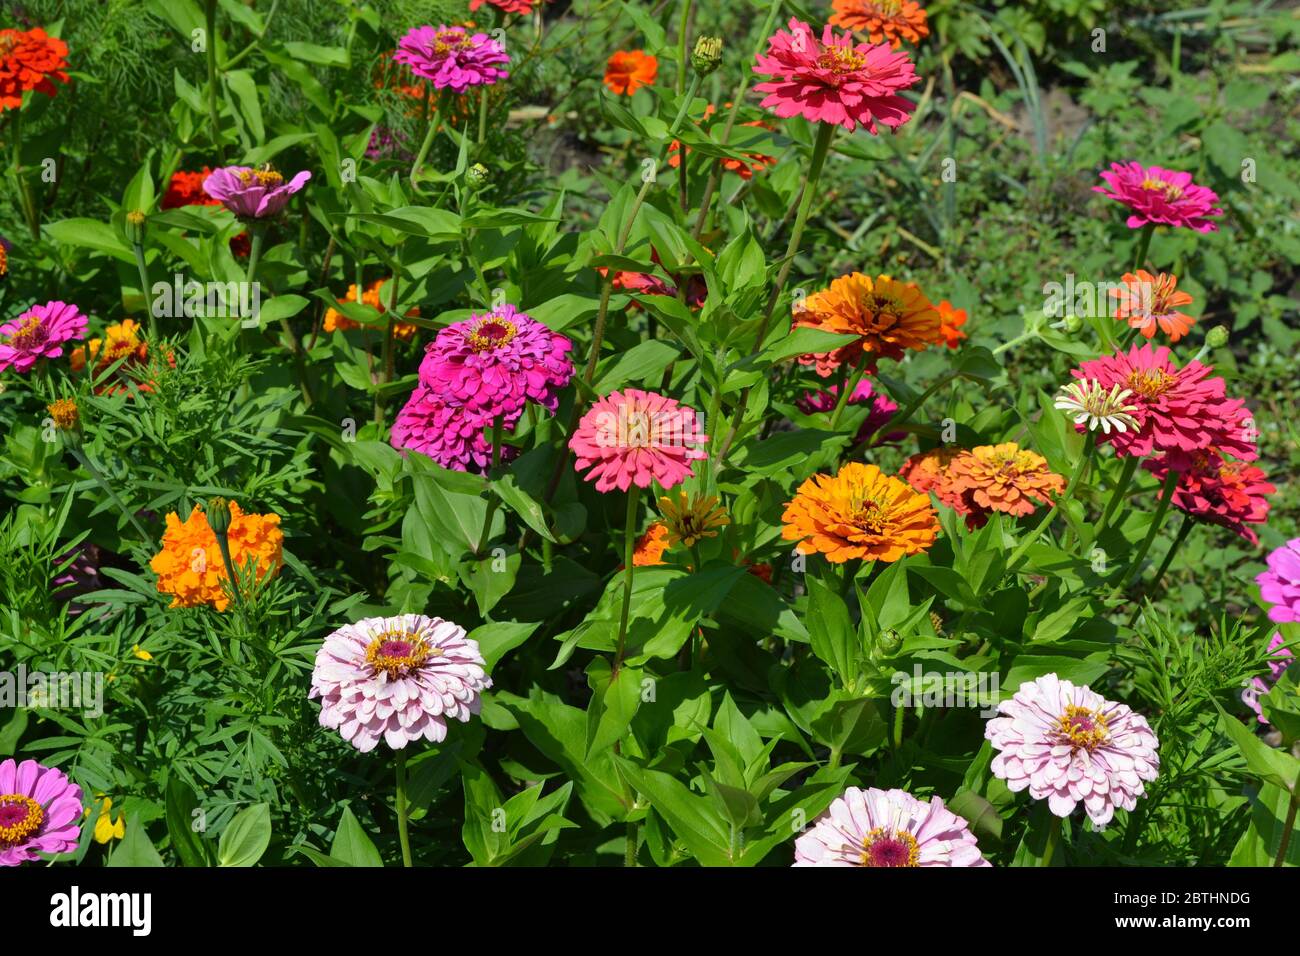 Flower Zinnia Gardening Zinnia A Genus Of Annual And Perennial Grasses And Dwarf Shrubs Of The Asteraceae Family Multicolored Stock Photo Alamy